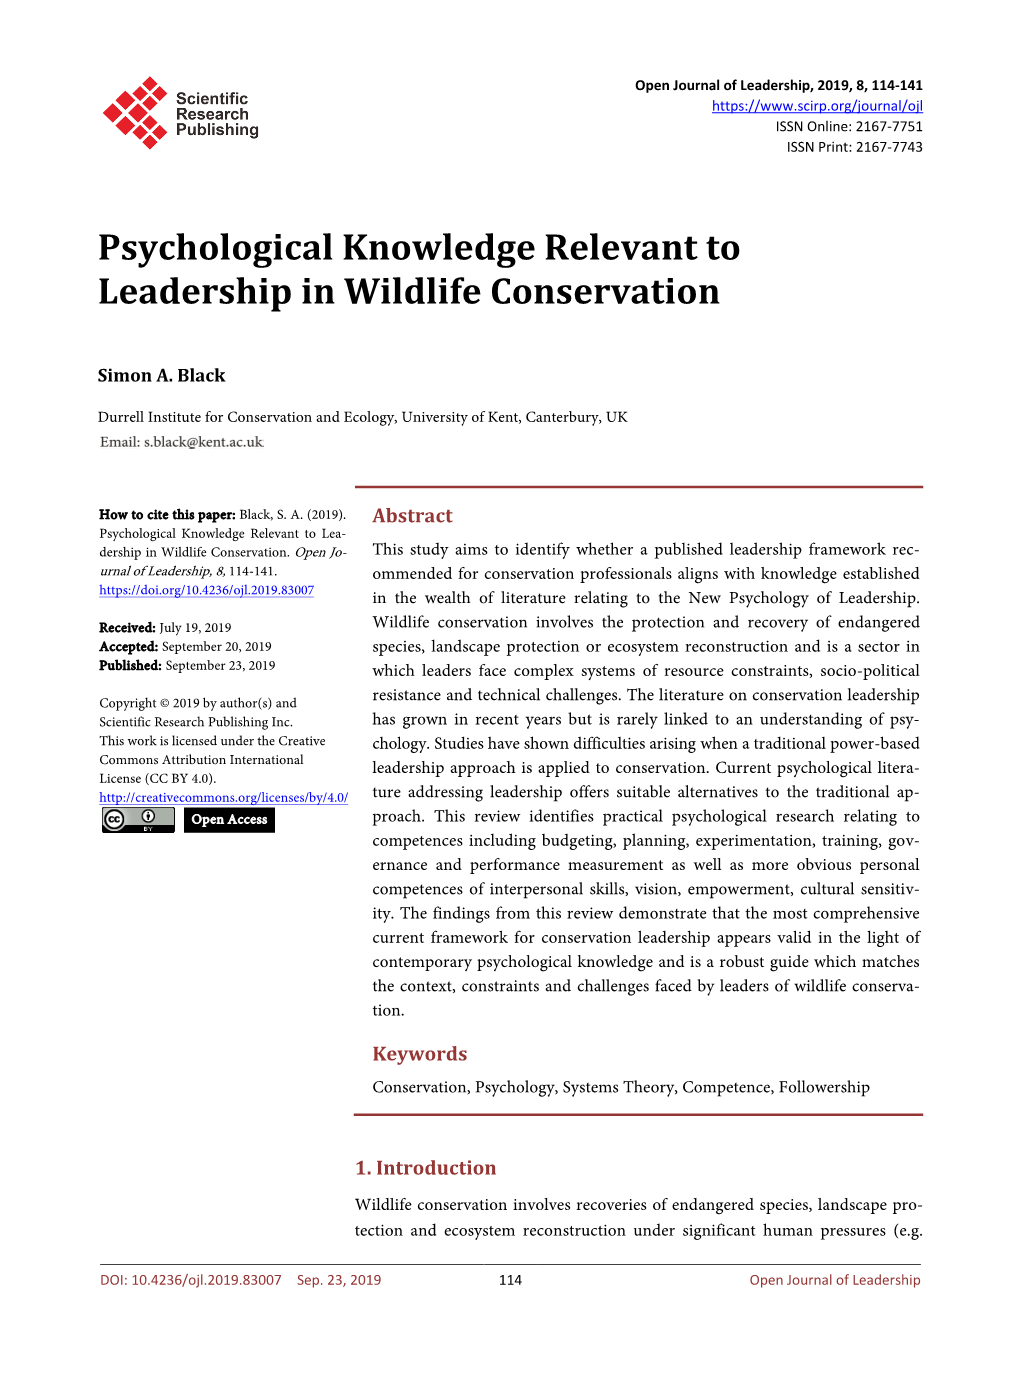 Psychological Knowledge Relevant to Leadership in Wildlife Conservation